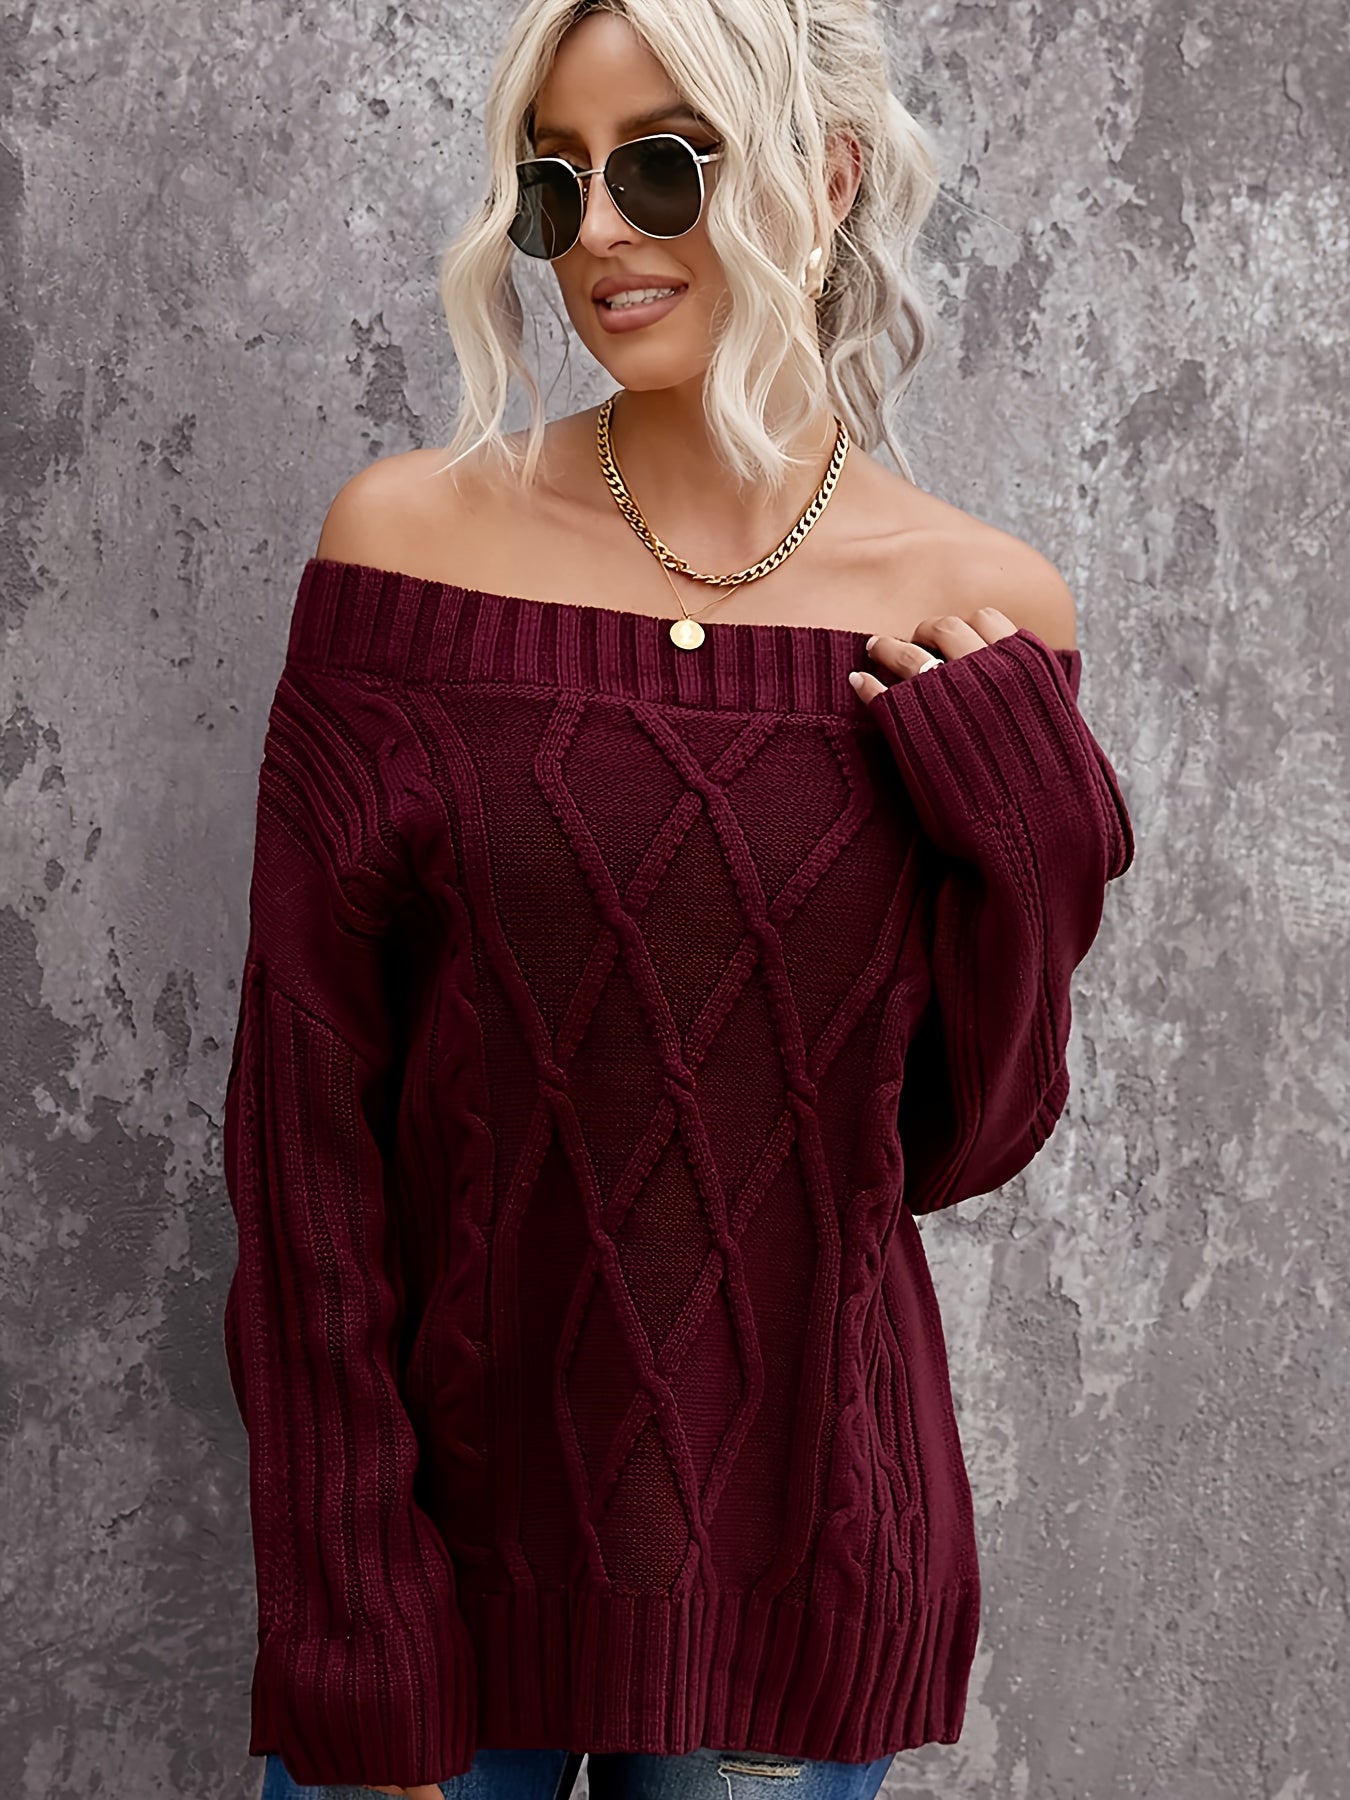 Antmvs Sexy Off Shoulder Sweater, Casual Solid Long Sleeve Loose Fall Winter Knit Sweater, Women's Clothing